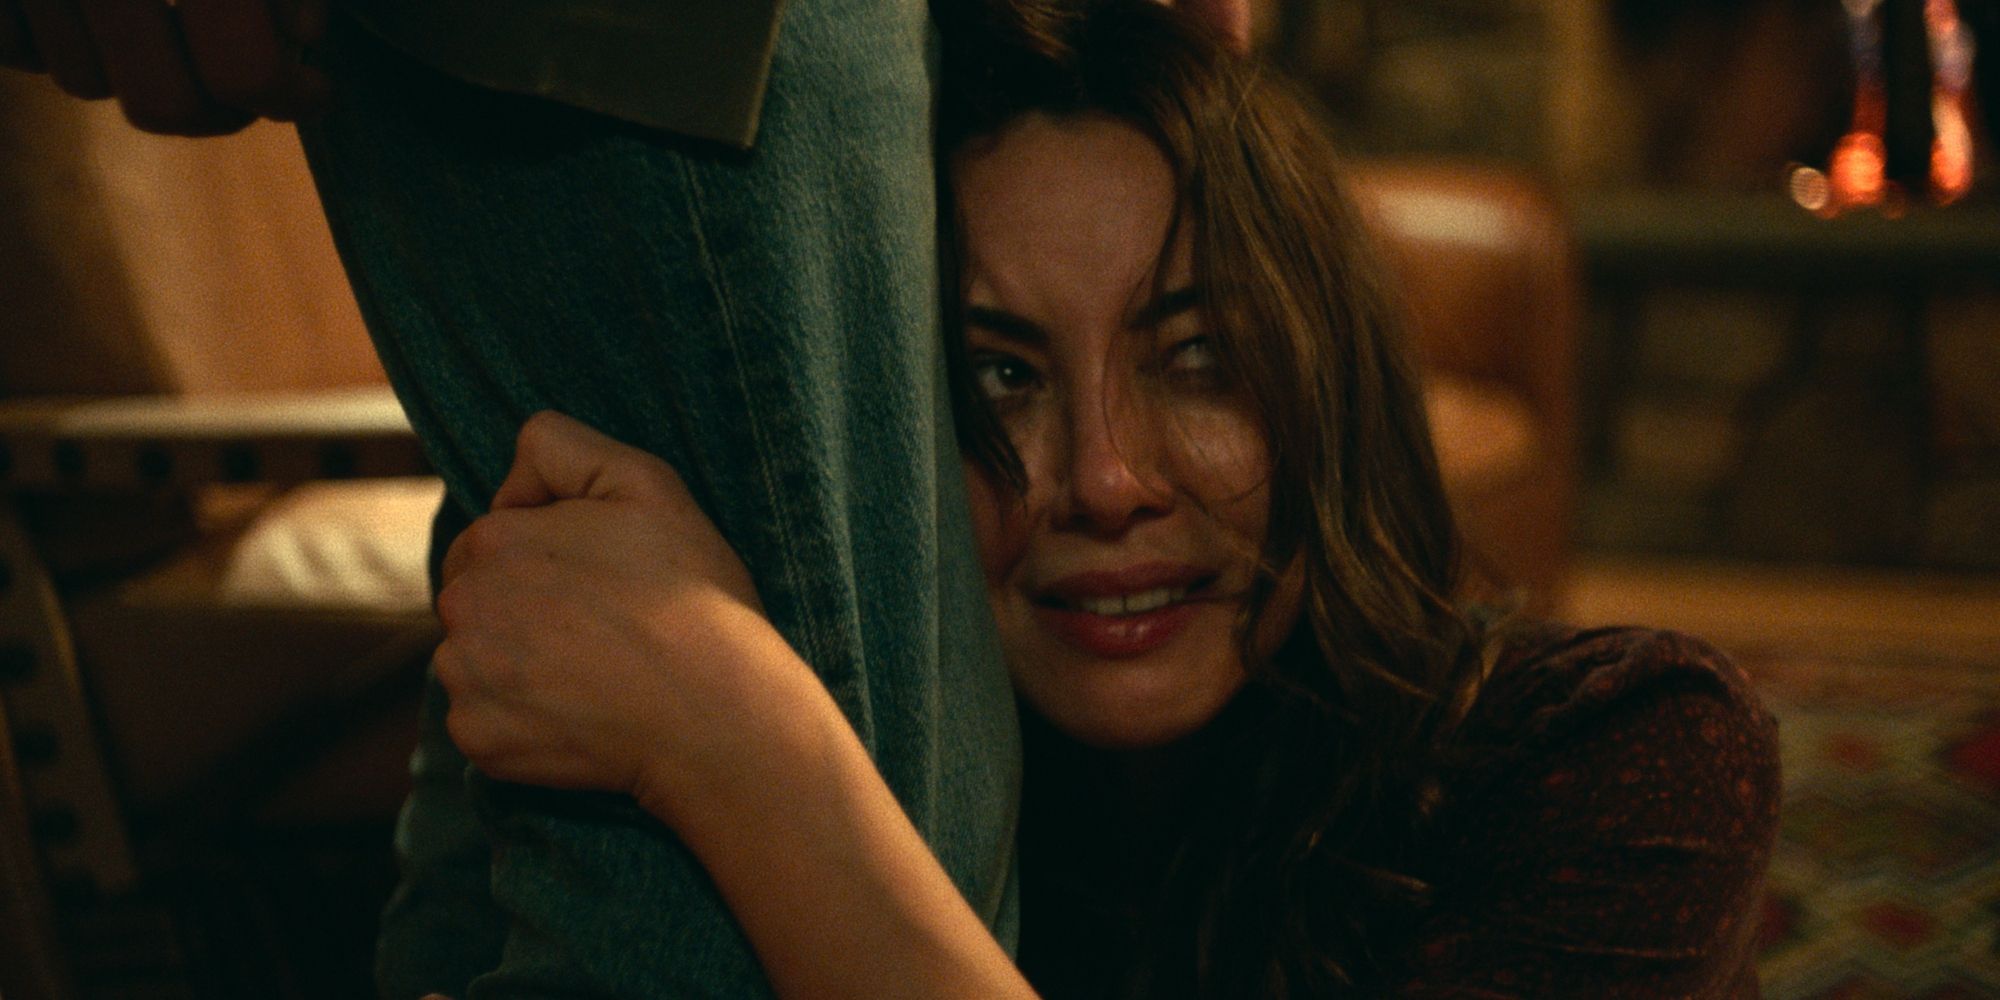 Allison crying while holding on to a man's leg in Black Bear.